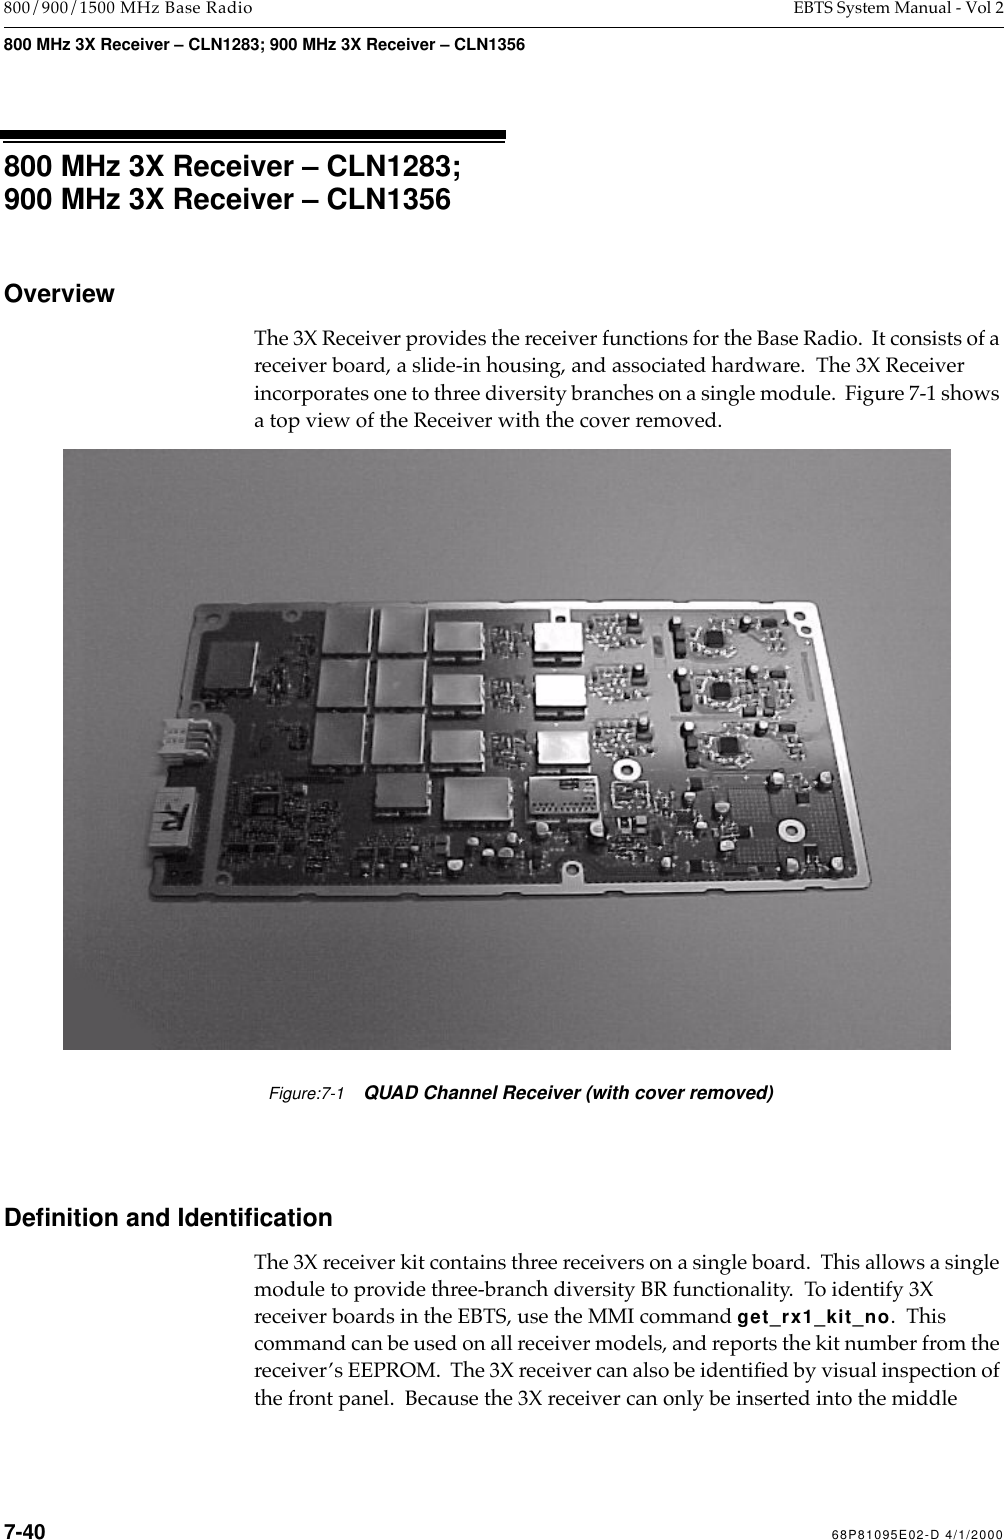  7-40 68P81095E02-D 4/1/2000 800/900/1500 MHz Base Radio EBTS System Manual - Vol 2 800 MHz 3X Receiver – CLN1283; 900 MHz 3X Receiver – CLN1356 800 MHz 3X Receiver – CLN1283;900 MHz 3X Receiver – CLN1356 Overview The 3X Receiver provides the receiver functions for the Base Radio.  It consists of a receiver board, a slide-in housing, and associated hardware.  The 3X Receiver incorporates one to three diversity branches on a single module.  Figure 7-1 shows a top view of the Receiver with the cover removed. Deﬁnition and Identiﬁcation The 3X receiver kit contains three receivers on a single board.  This allows a single module to provide three-branch diversity BR functionality.  To identify 3X receiver boards in the EBTS, use the MMI command  get_rx1_kit_no .  This command can be used on all receiver models, and reports the kit number from the receiverÕs EEPROM.  The 3X receiver can also be identiÞed by visual inspection of the front panel.  Because the 3X receiver can only be inserted into the middle Figure:7-1QUAD Channel Receiver (with cover removed)